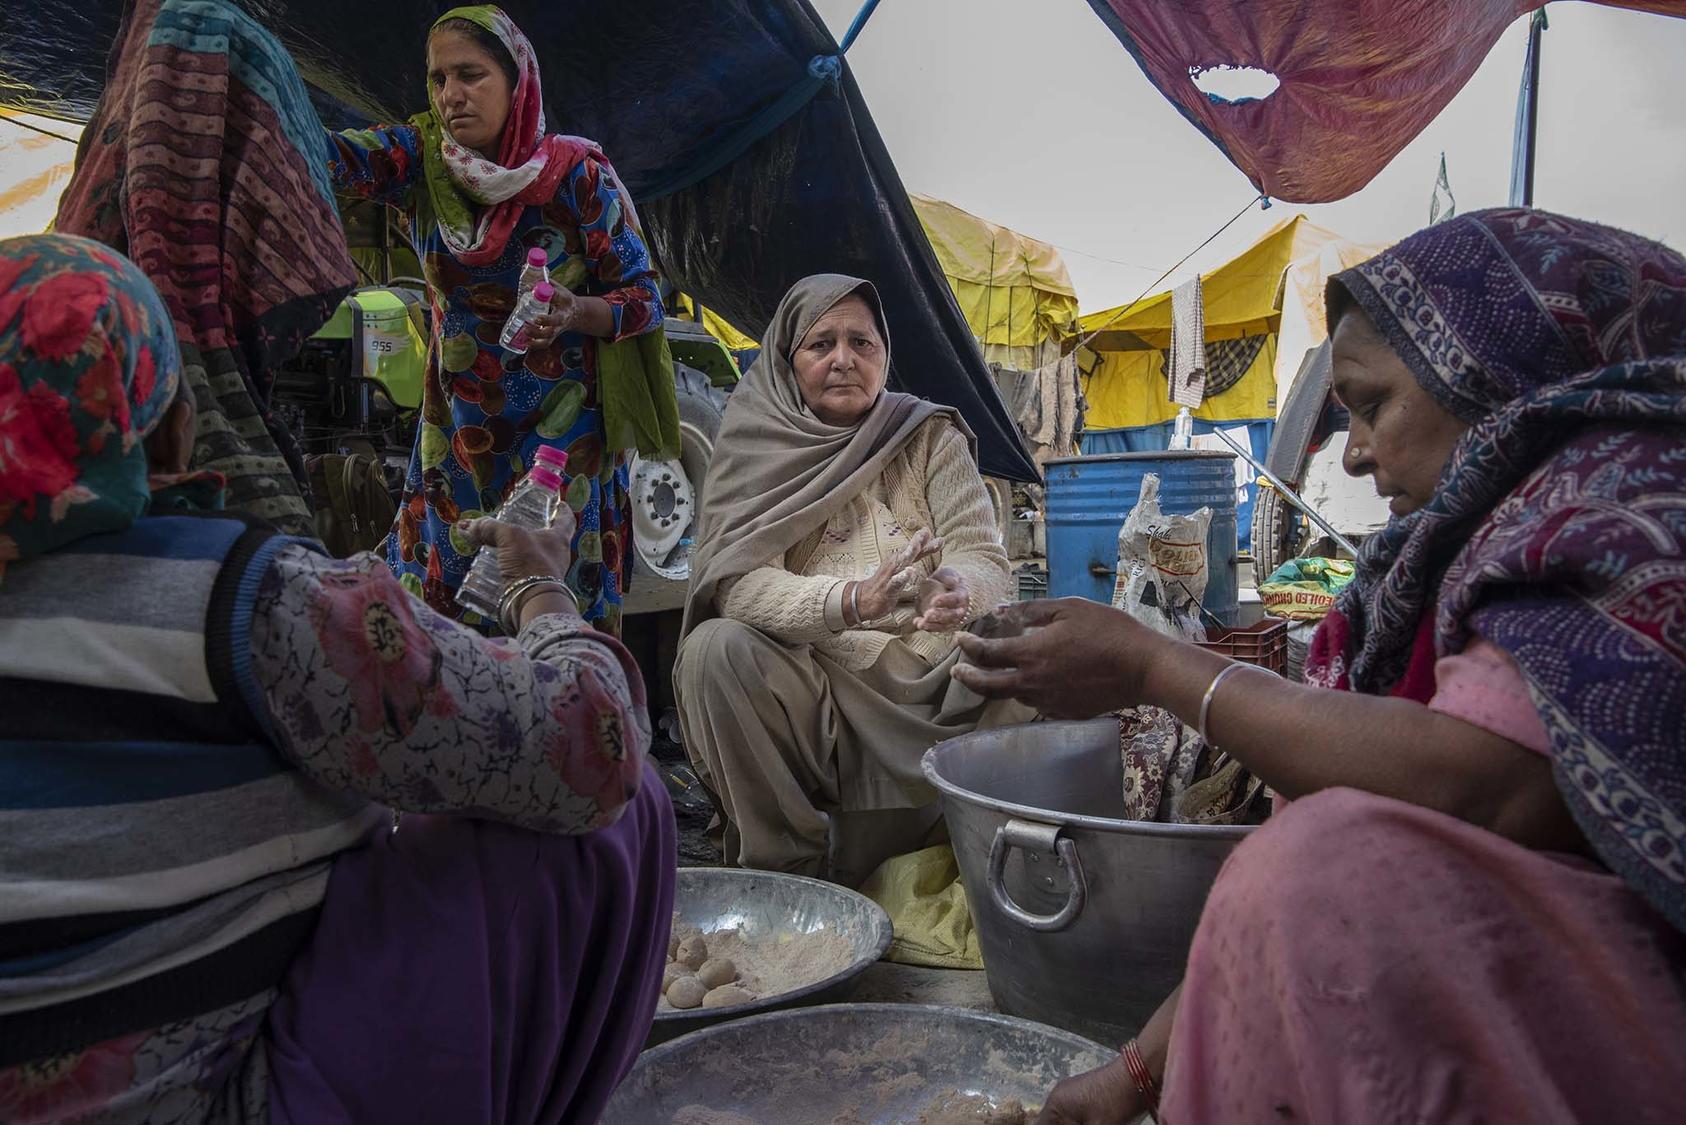 Gurmeet Kaur, center, preparing chapati, in Singhu, India, Jan. 4, 2021. Protesters have created camps around Delhi that are virtual cities unto themselves, using own organizational skills to protest new government farm policies. (Saumya Khandelwal/The New York Times)